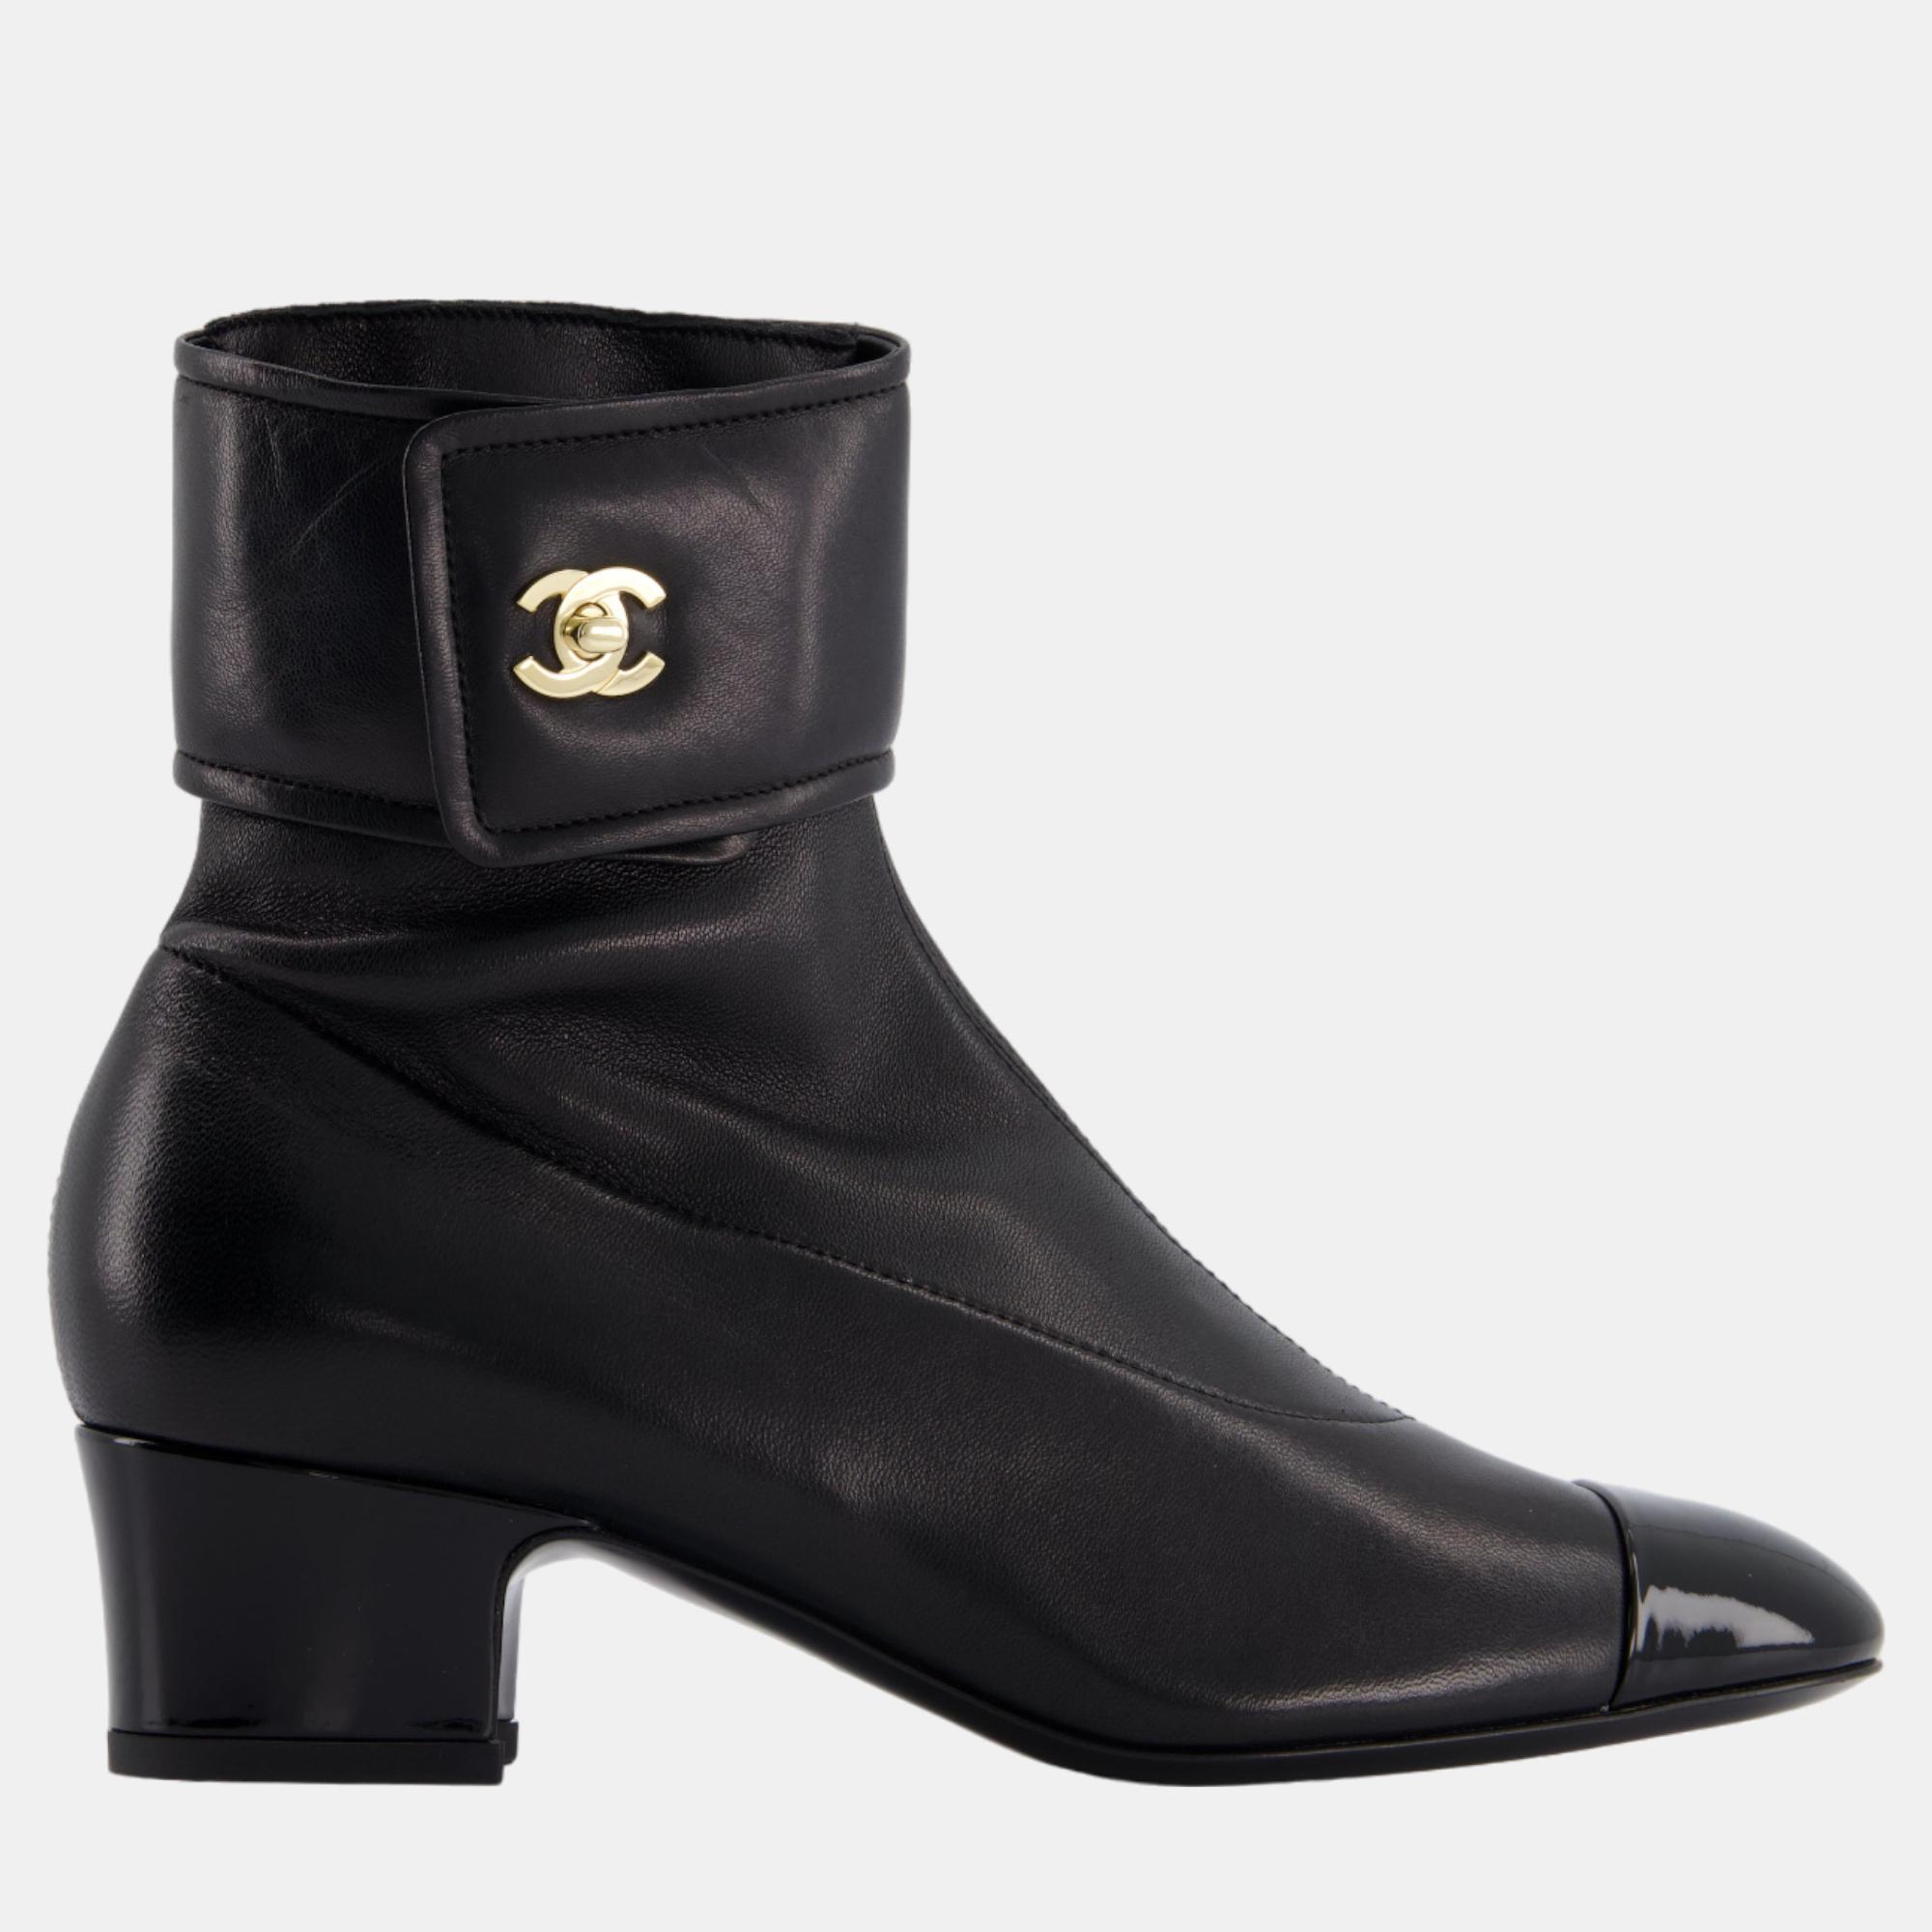 

Chanel Black Leather Ankle Boots with Patent Toe and Champagne Gold CC Logo Detail Size EU